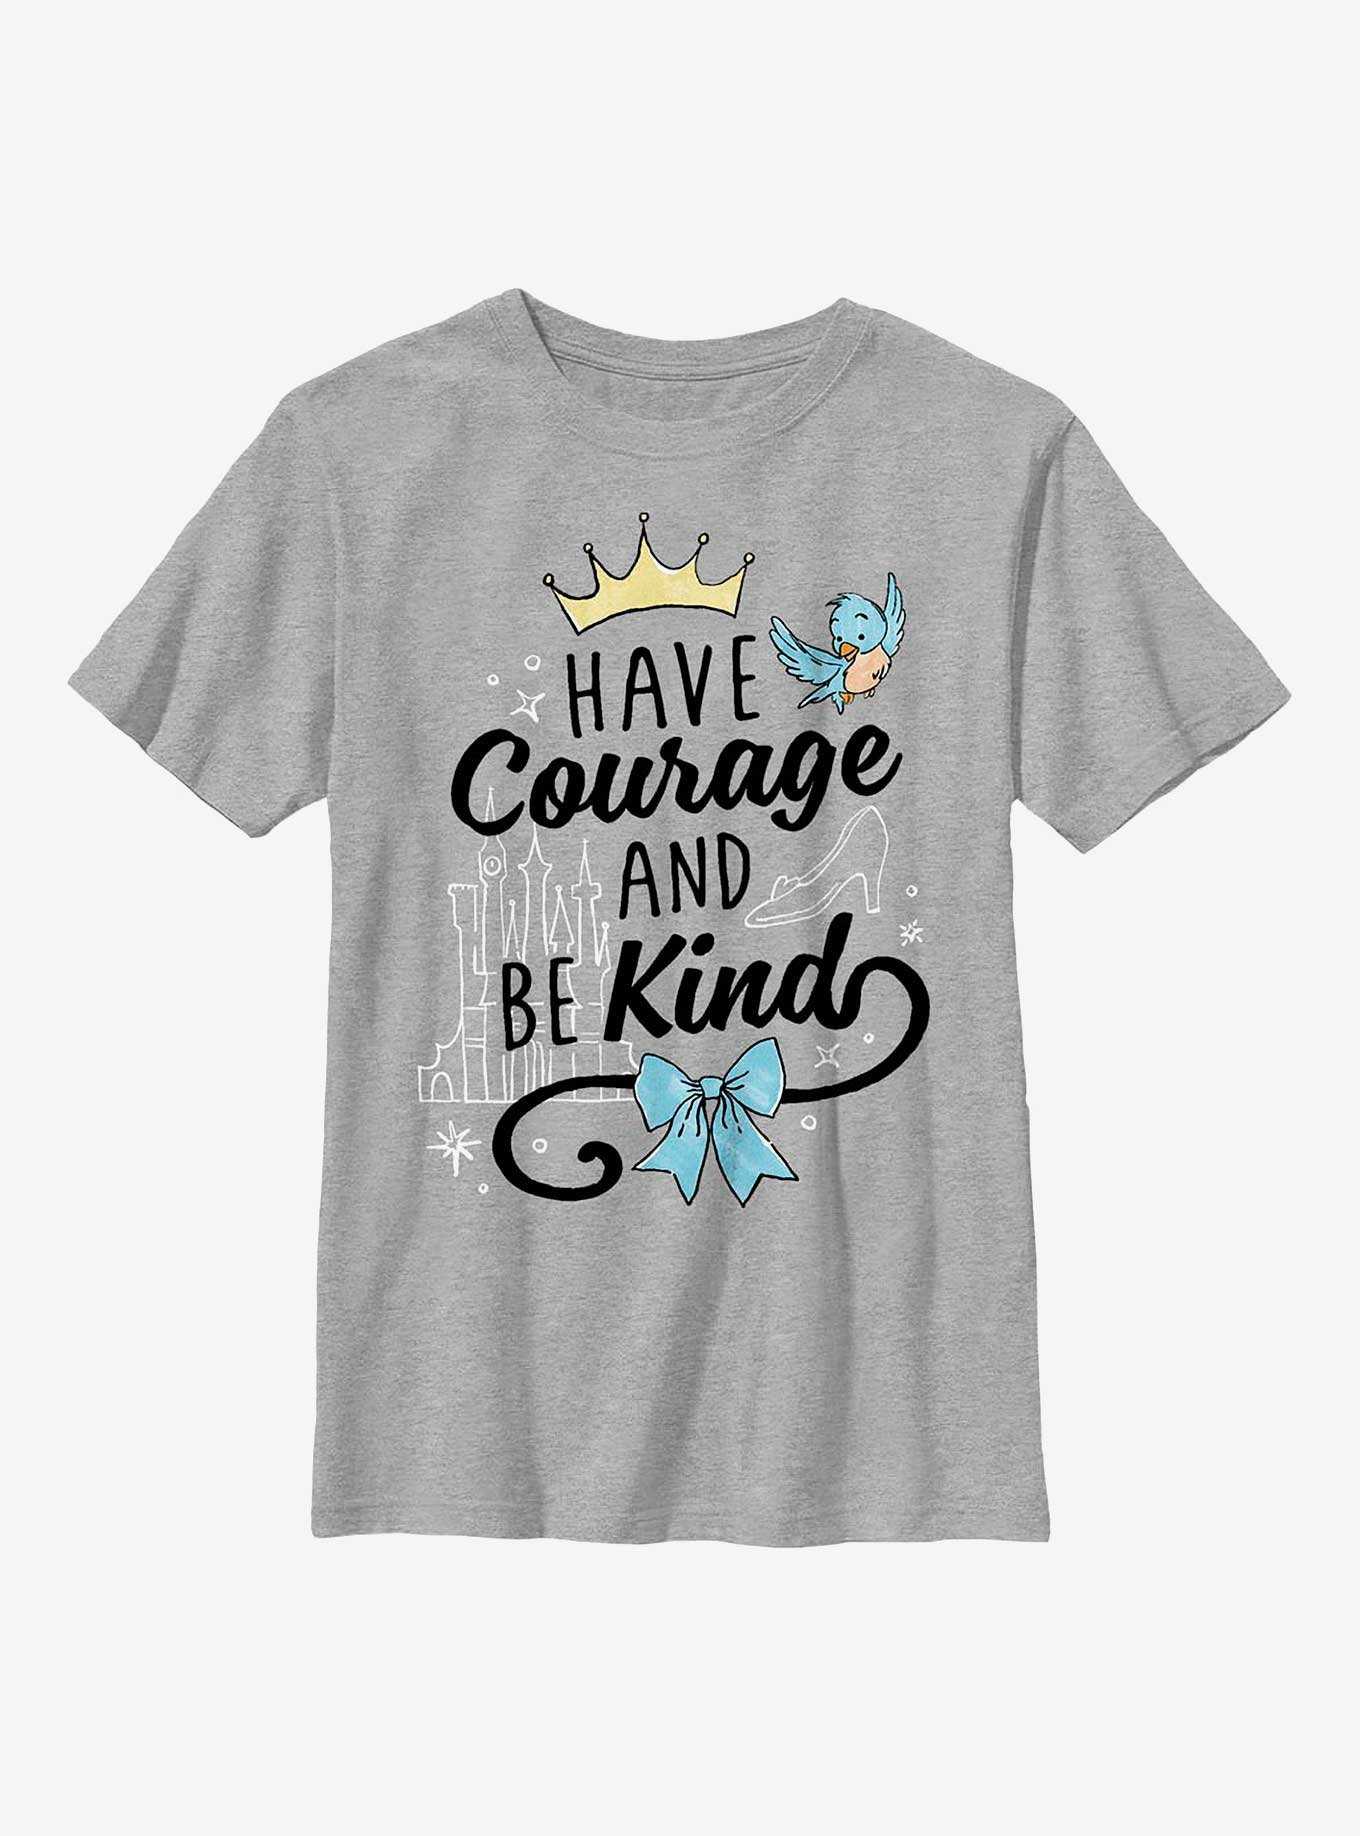 Disney Cinderella Have Courage & Be Kind Youth T-Shirt, , hi-res